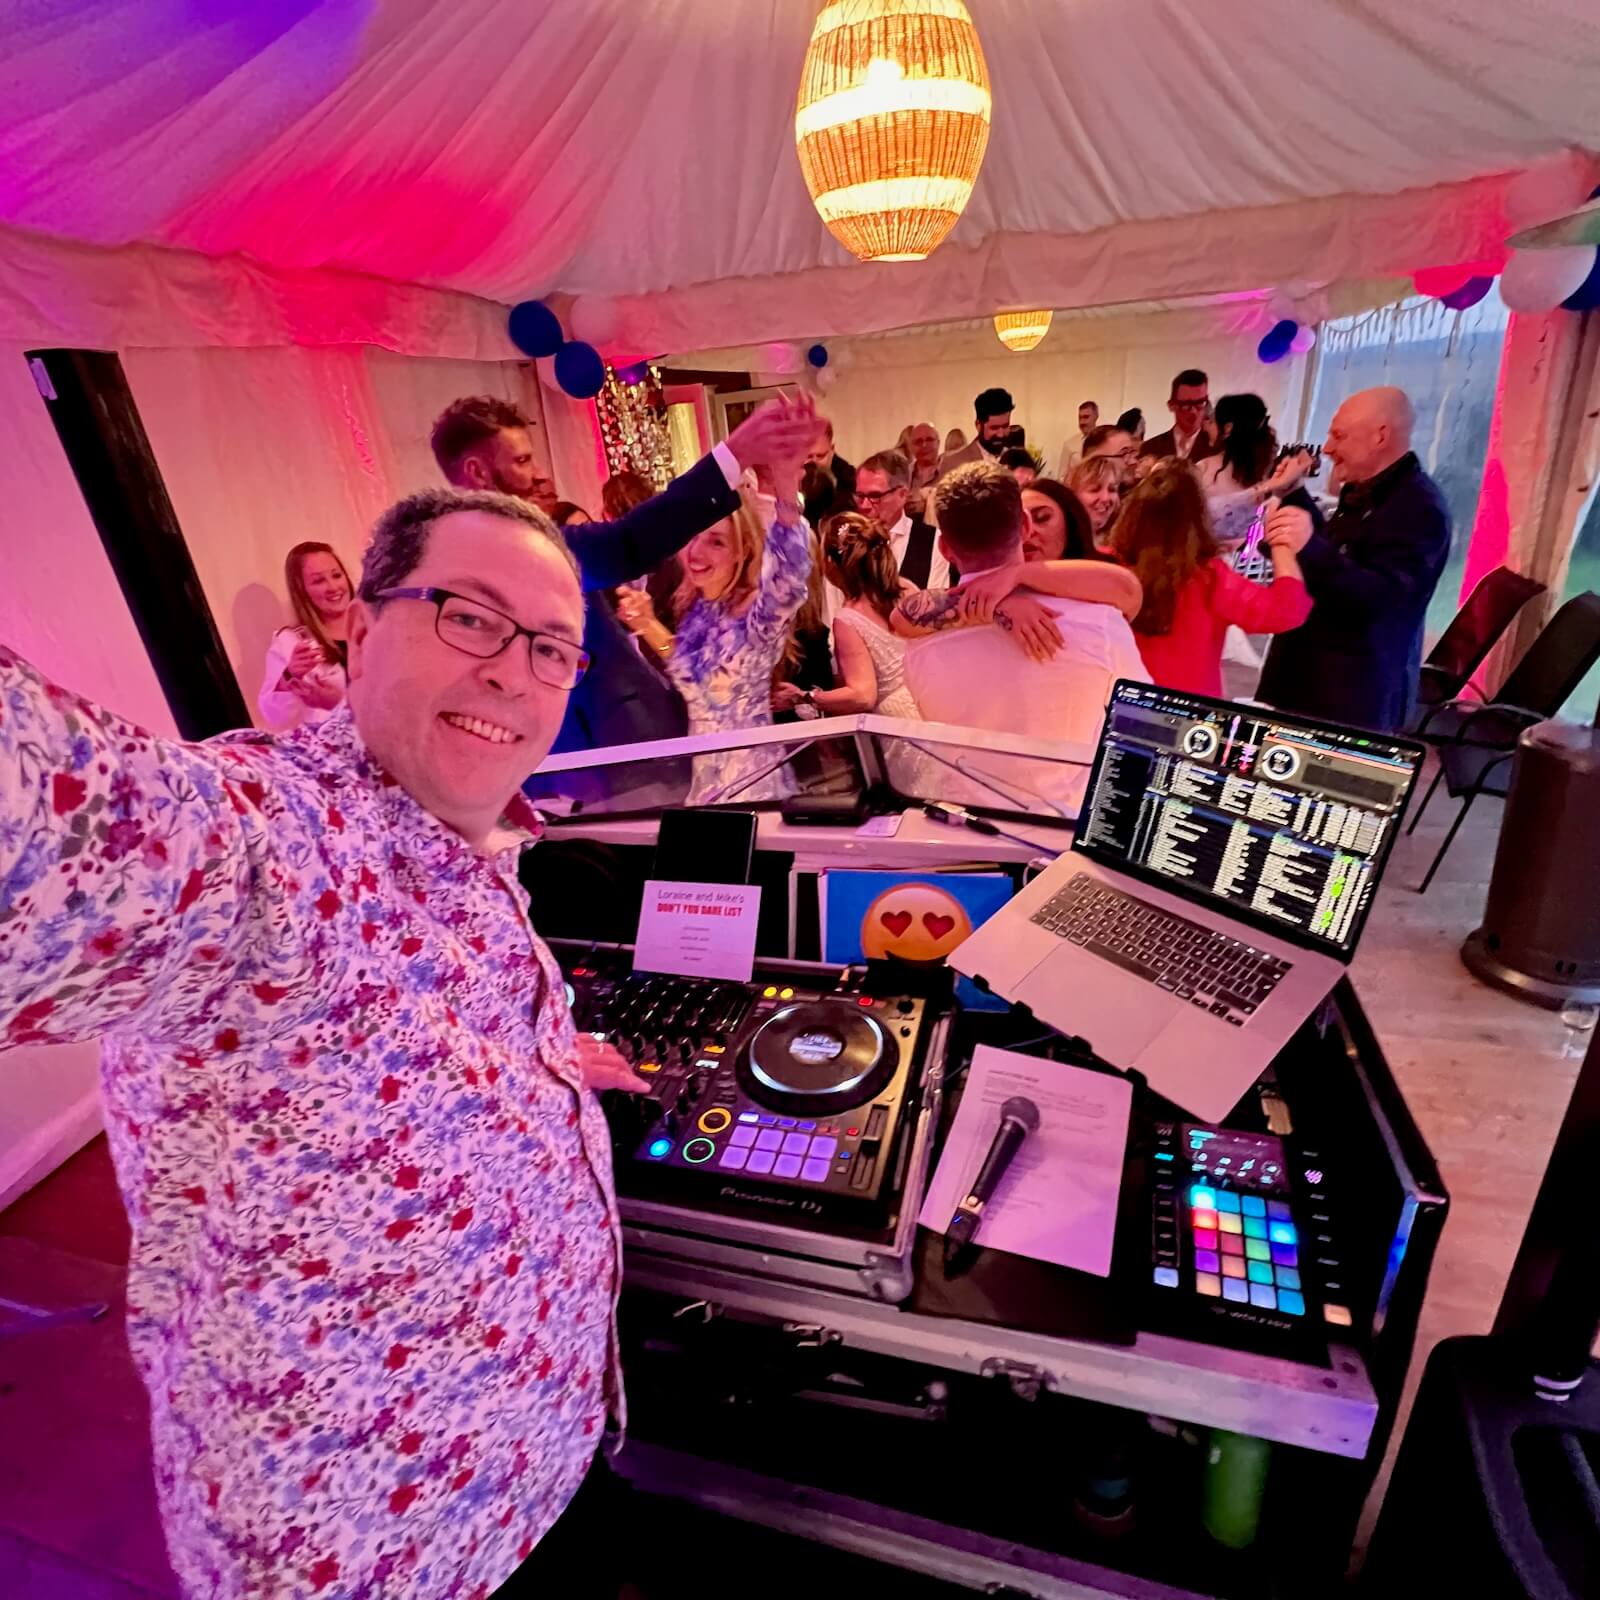 Brian DJing Loraine and Mike's wedding